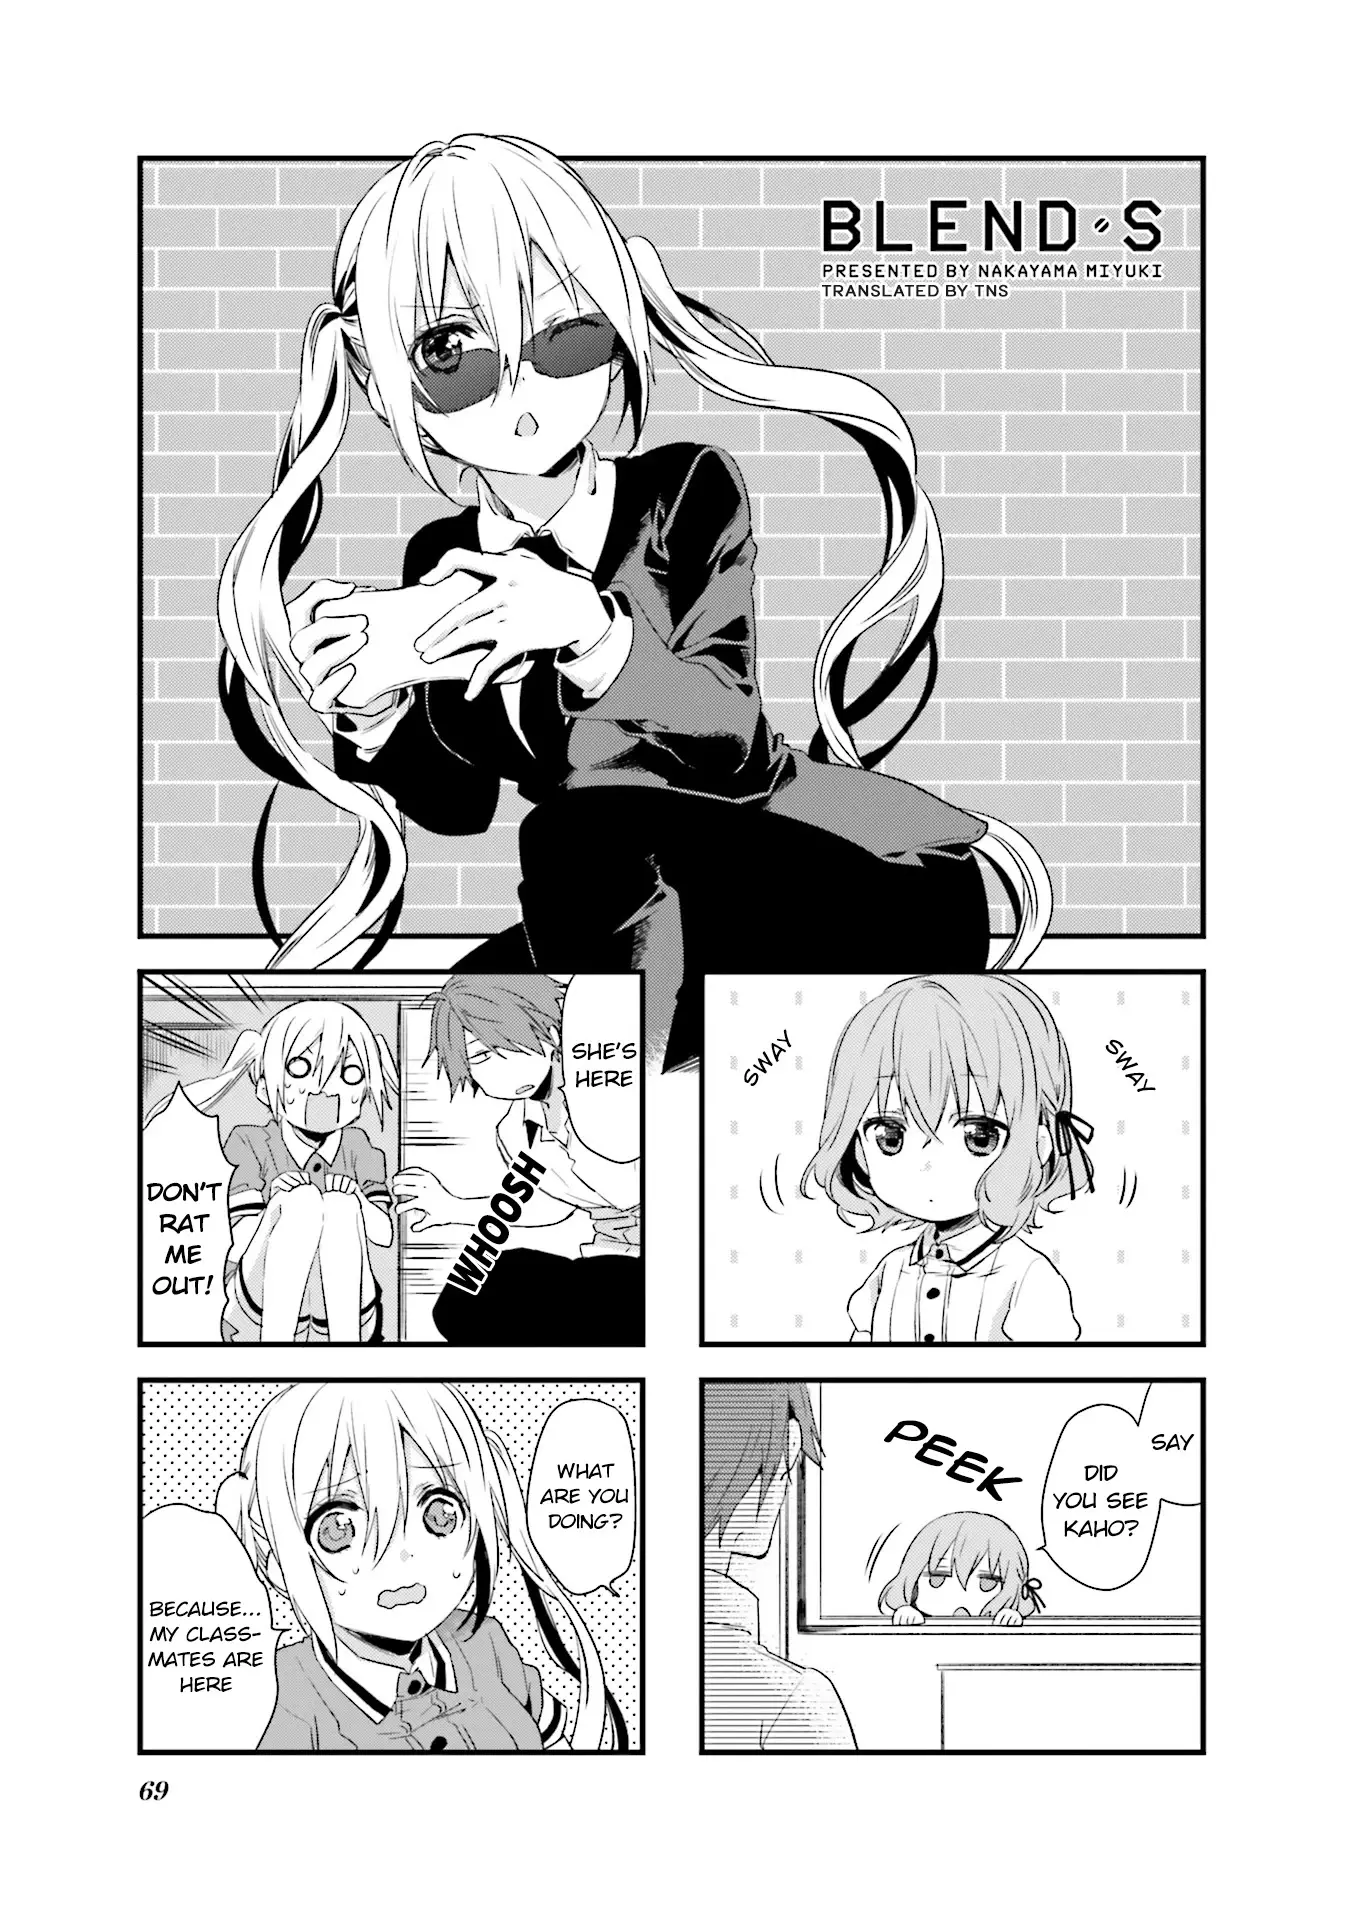 Blend S - 36 page 1-00bfcc0a